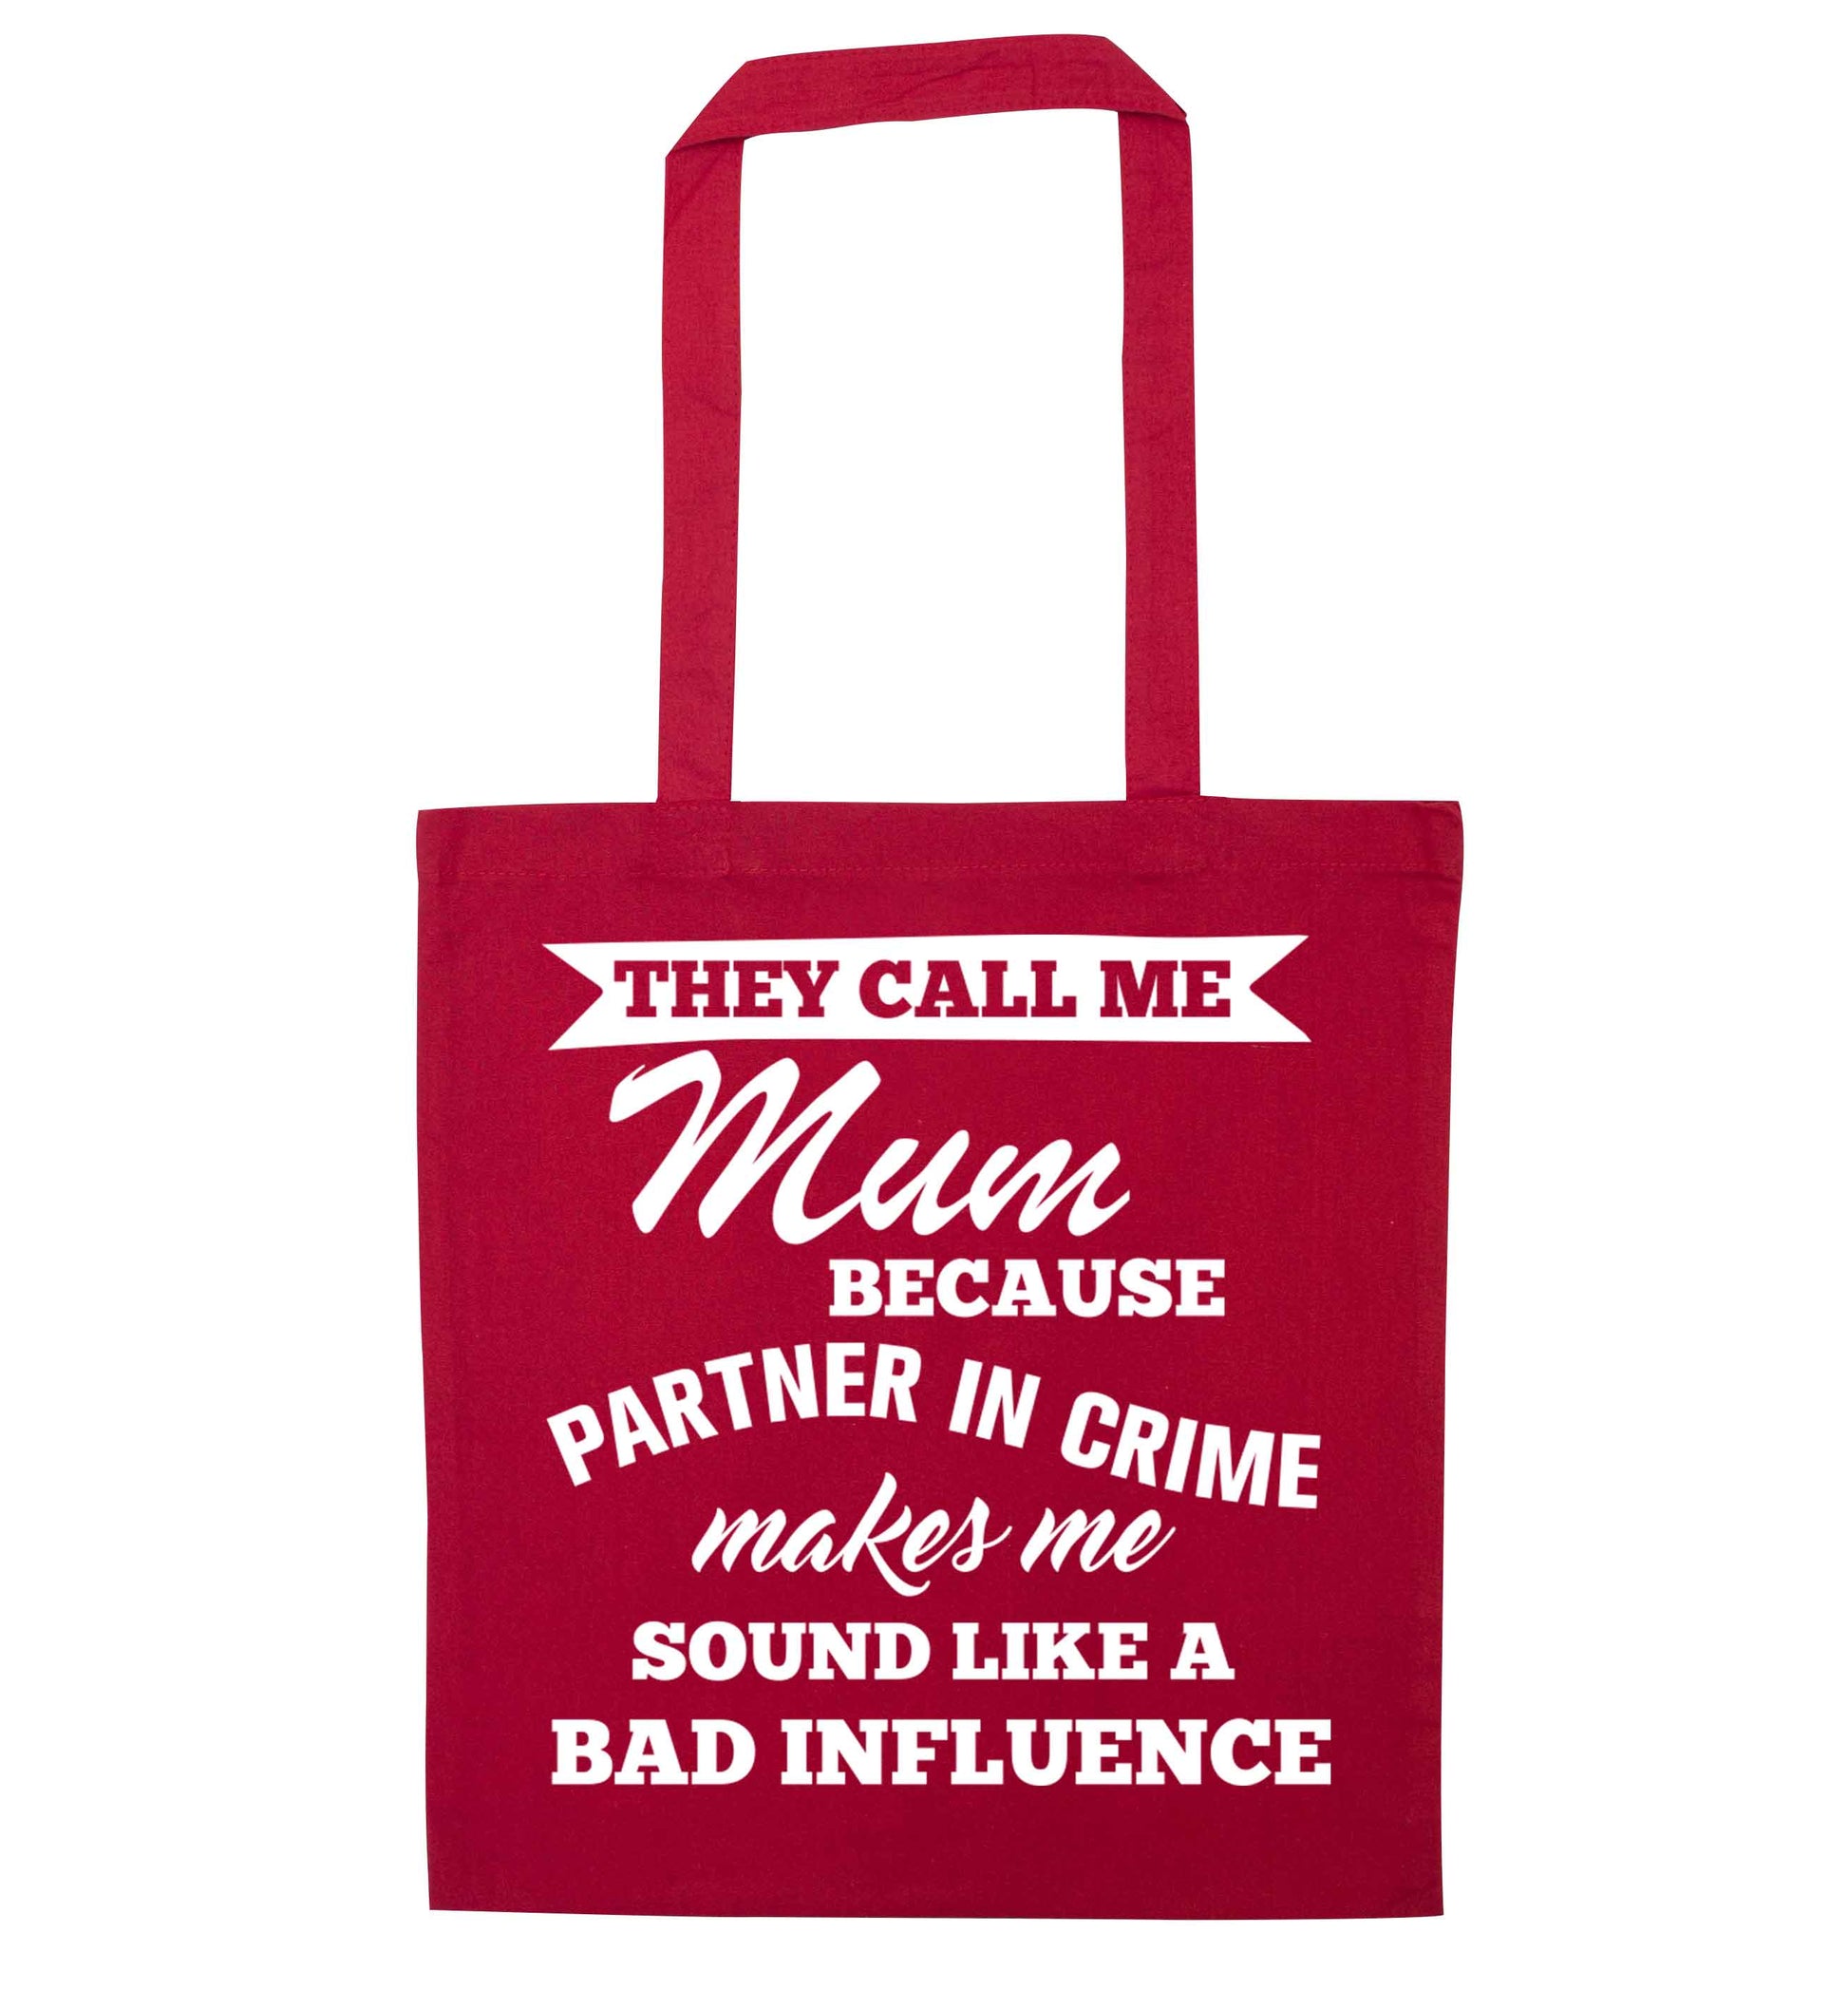 They call me mum because partner in crime makes me sound like a bad influence red tote bag